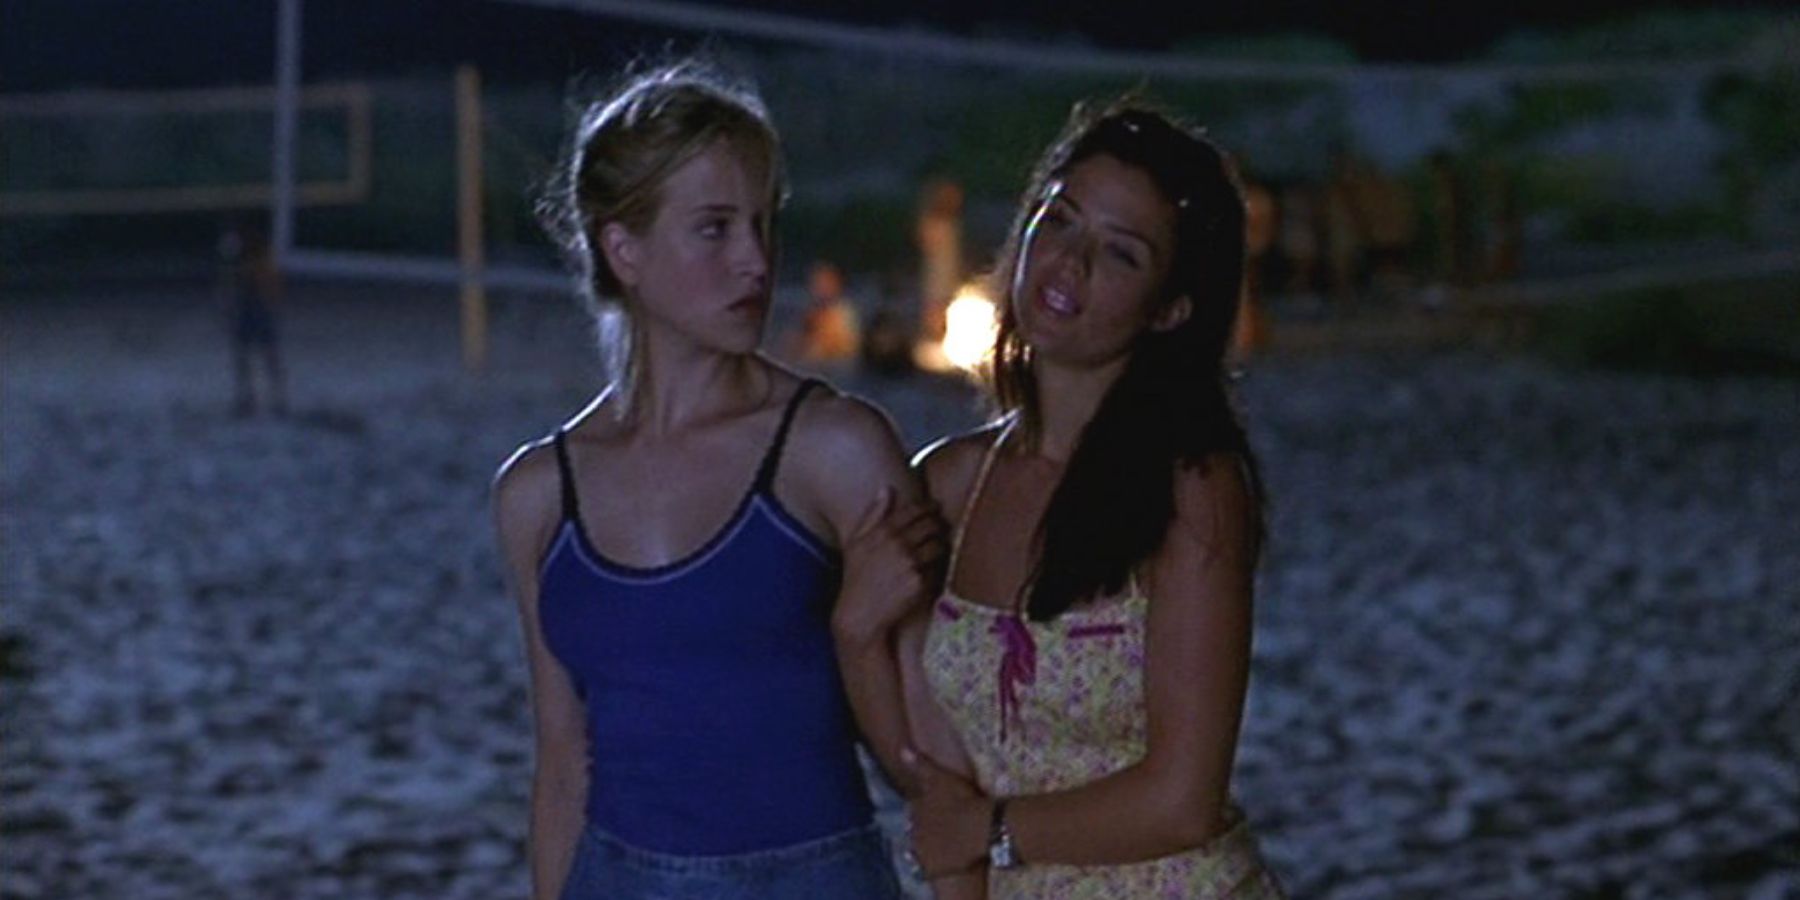 Adrien (Lori Heuring) and Brittany (Susan Ward) in The In Crowd